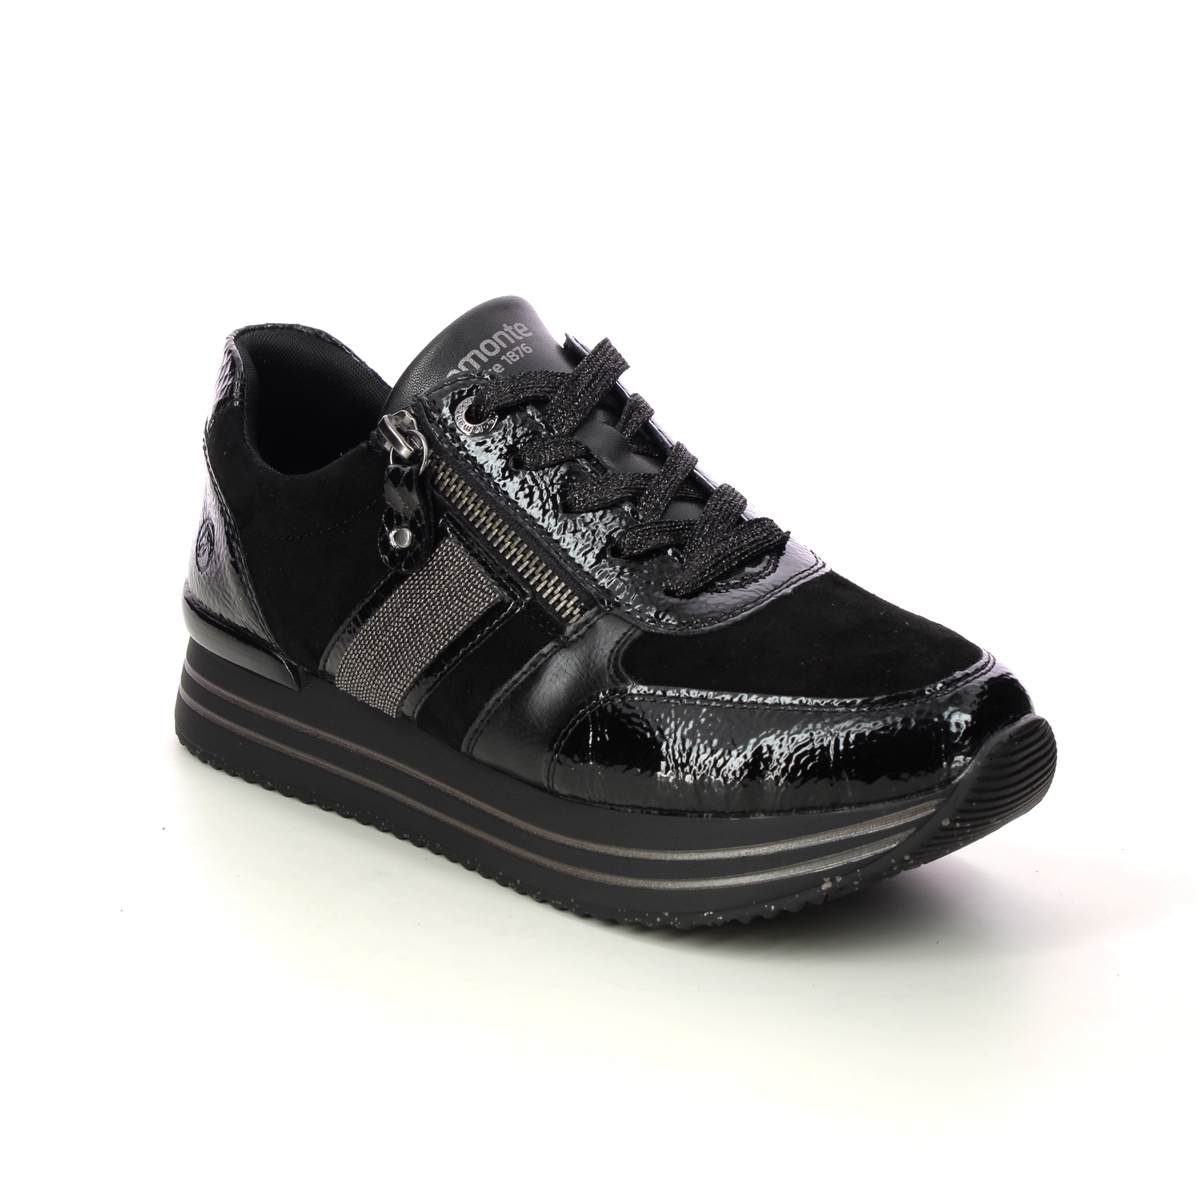 Remonte Ranger Black Patent Suede Womens Trainers D1321-01 In Size 36 In Plain Black Patent Suede